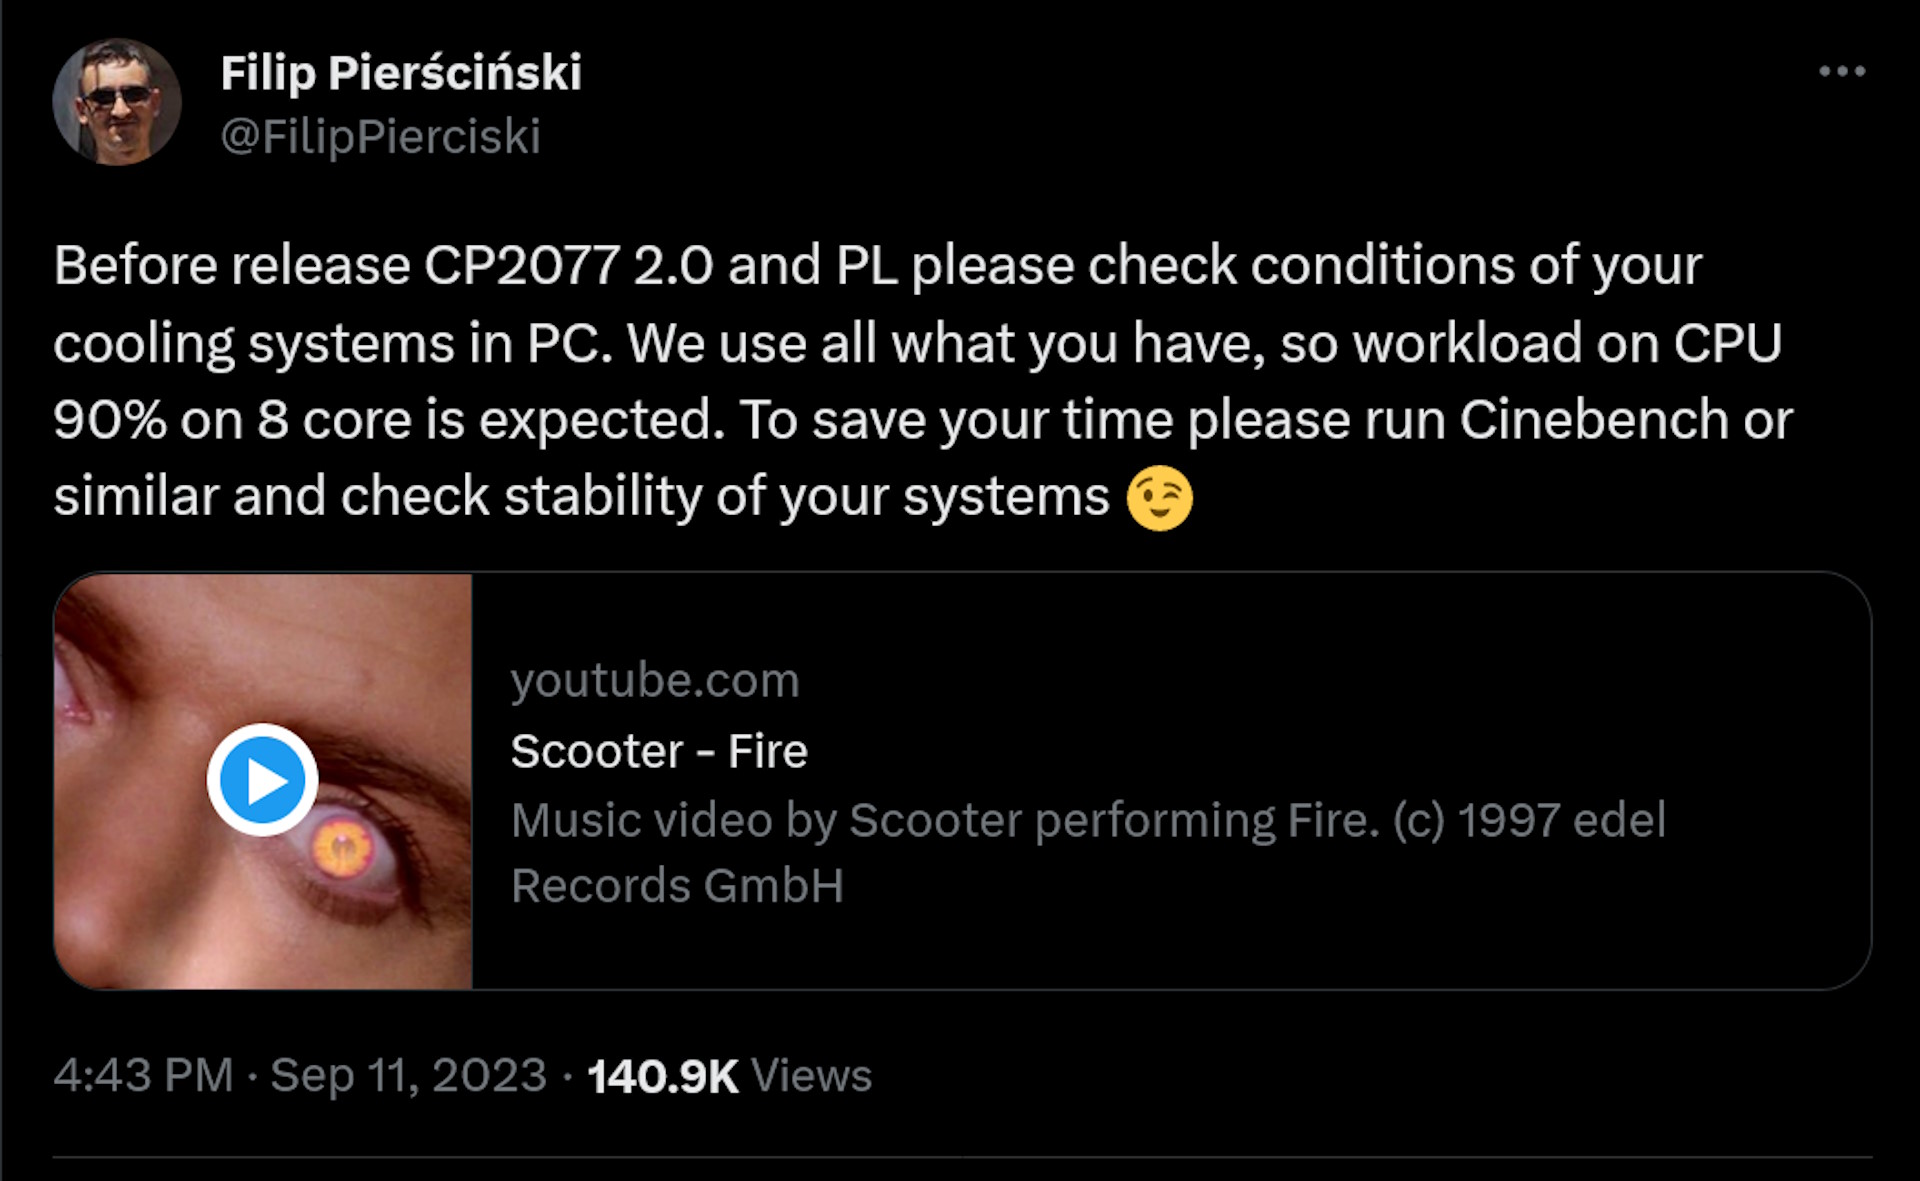 Before release CP2077 2.0 and PL please check conditions of your cooling systems in PC. We use all what you have, so workload on CPU 90% on 8 core is expected. To save your time please run Cinebench or similar and check stability of your systems 😉